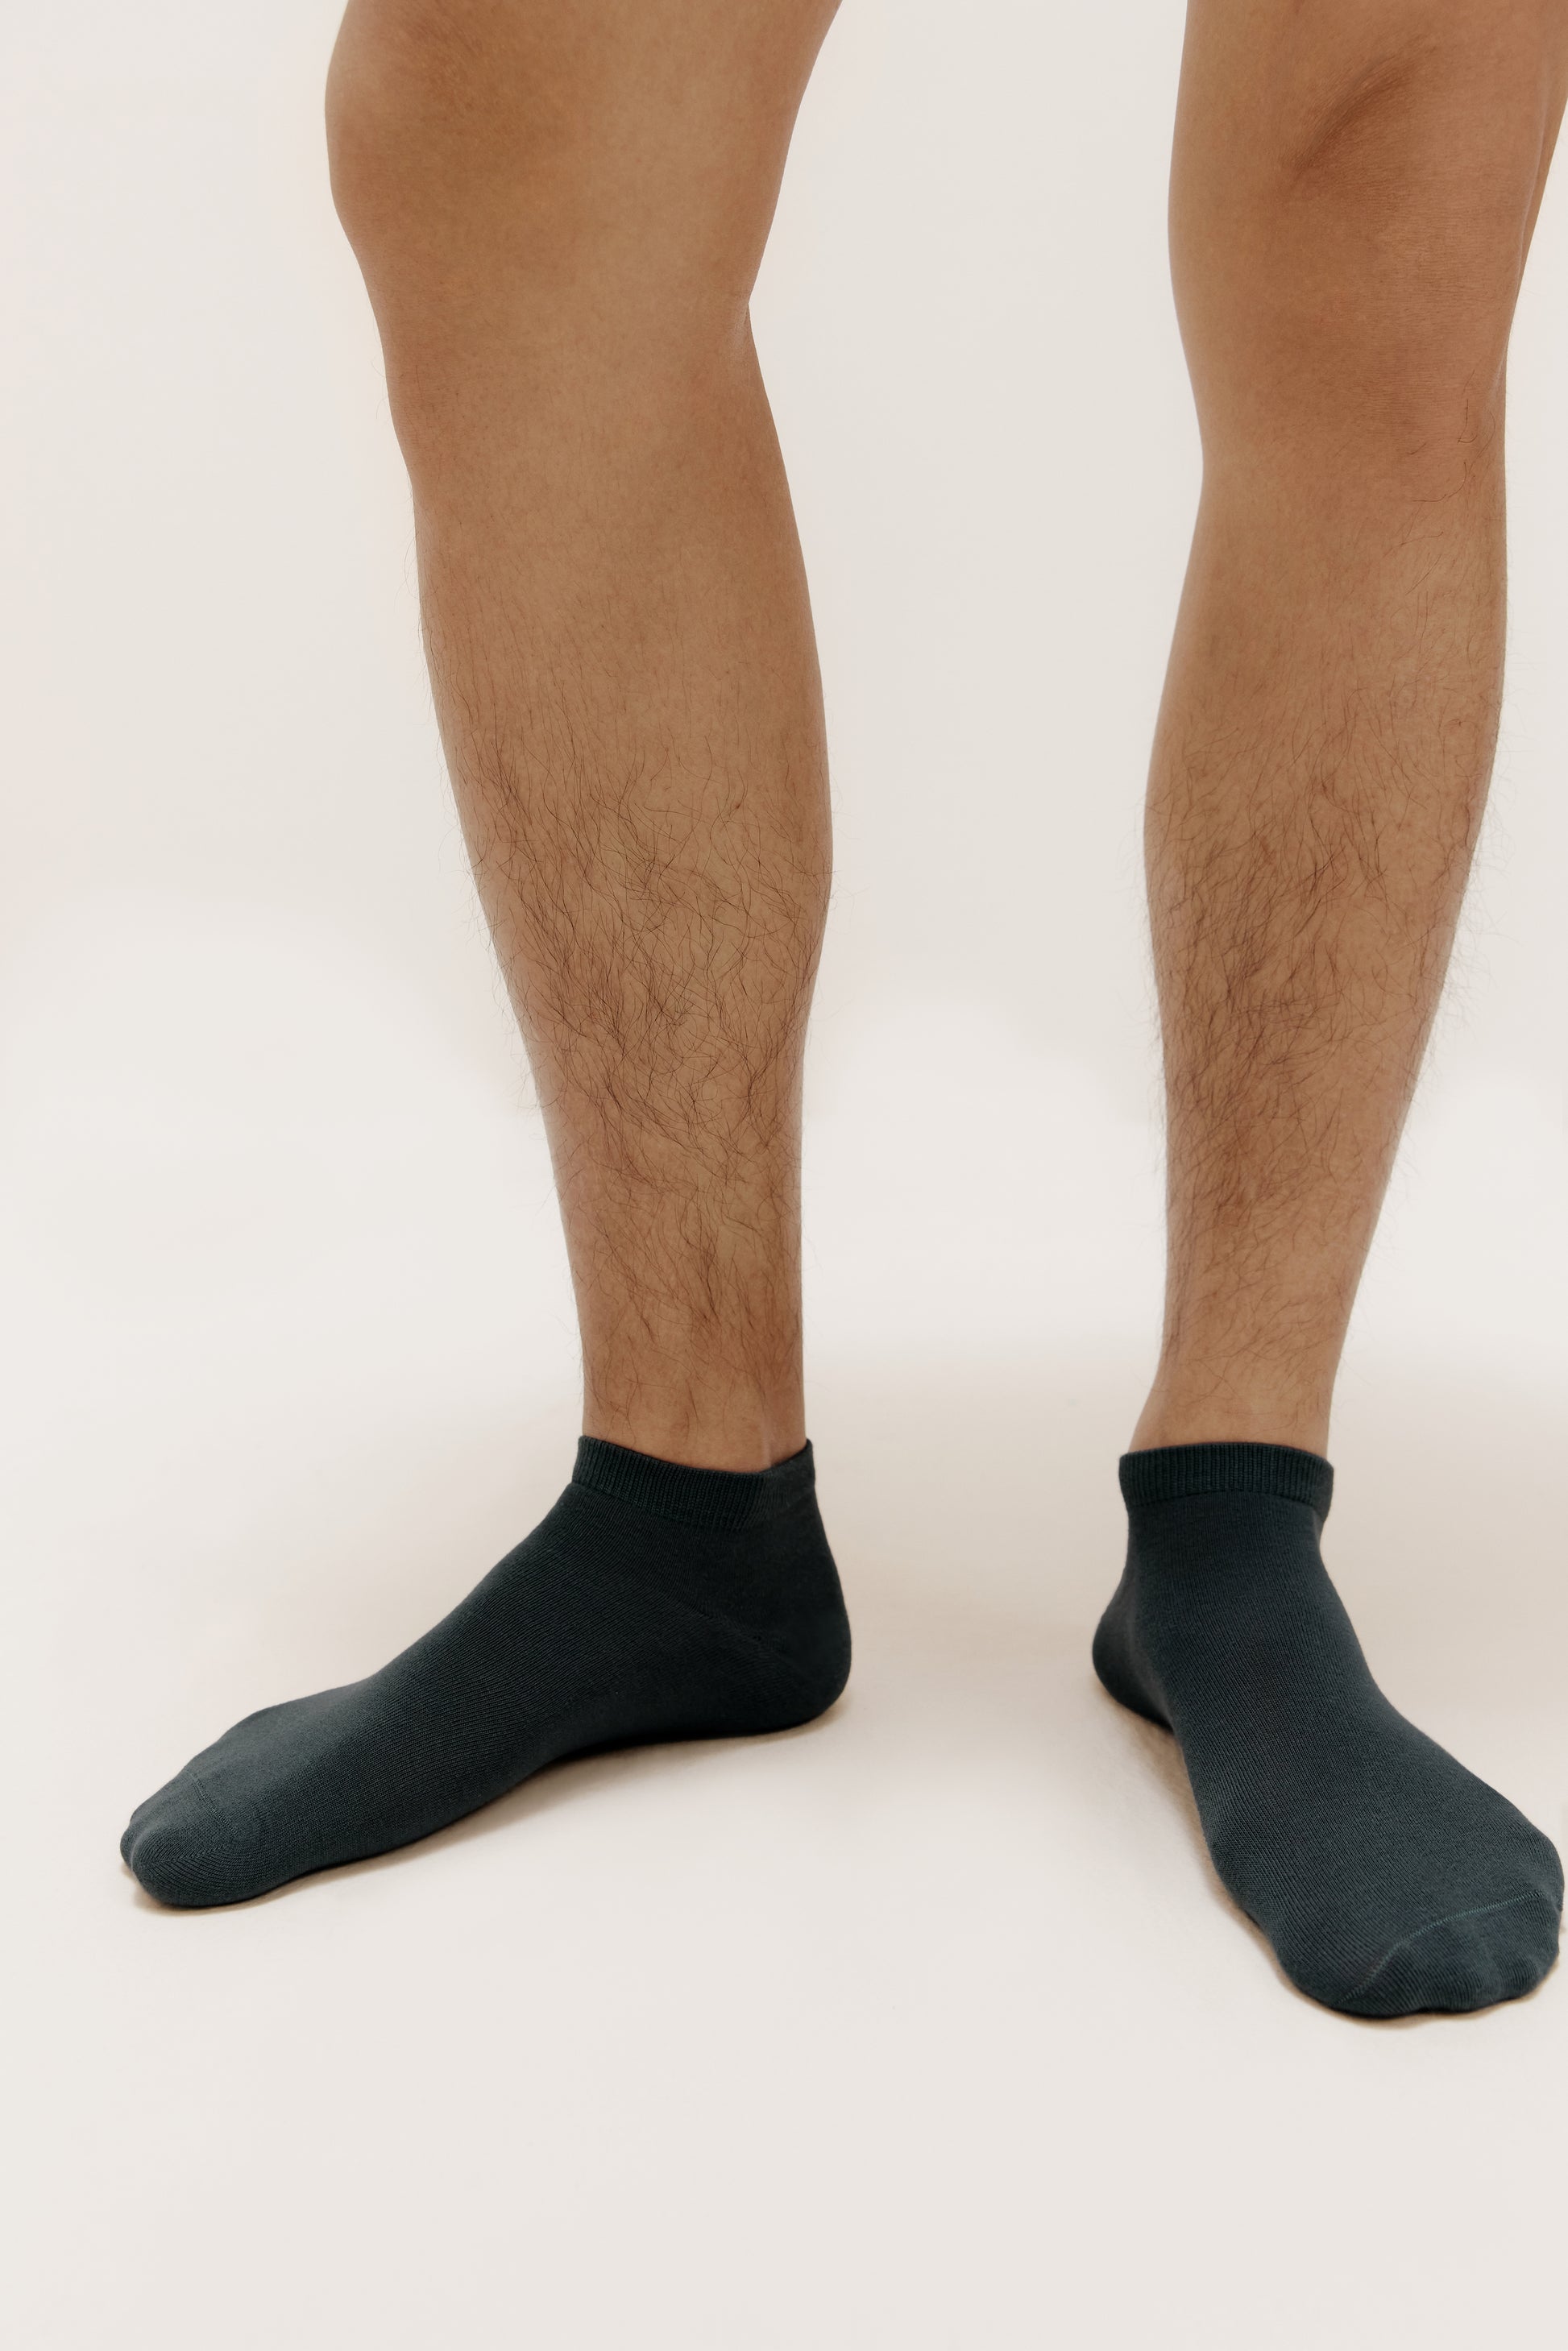 a person wearing a navy ankle socks